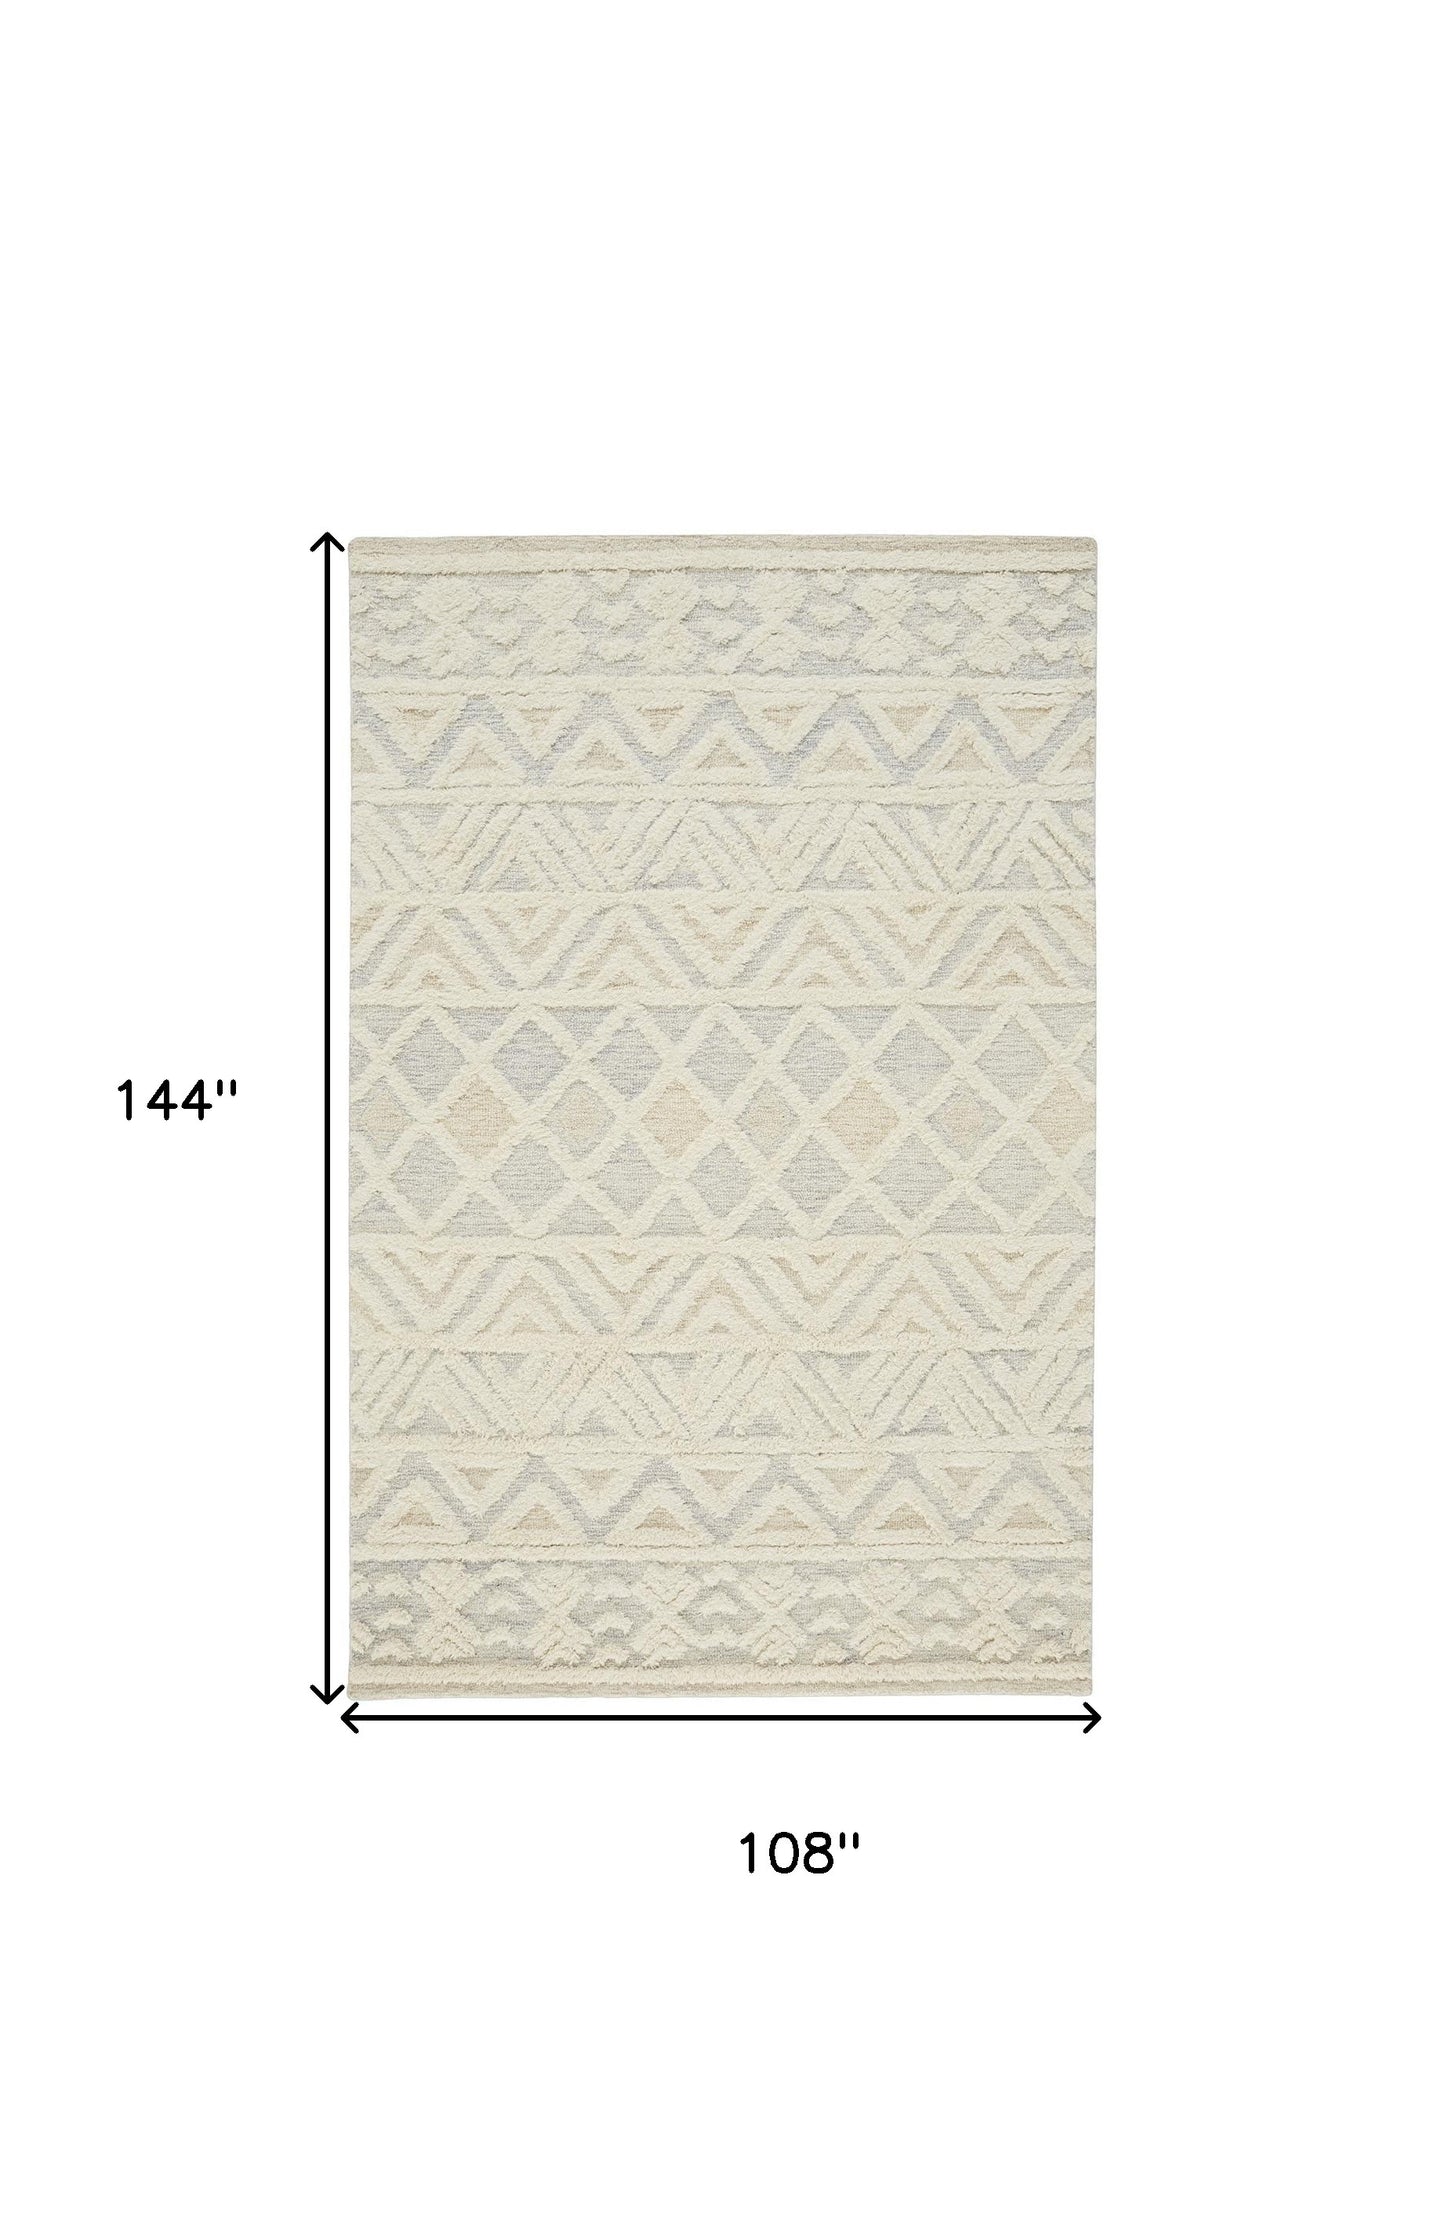 4' X 6' Ivory Blue And Tan Wool Geometric Tufted Handmade Stain Resistant Area Rug